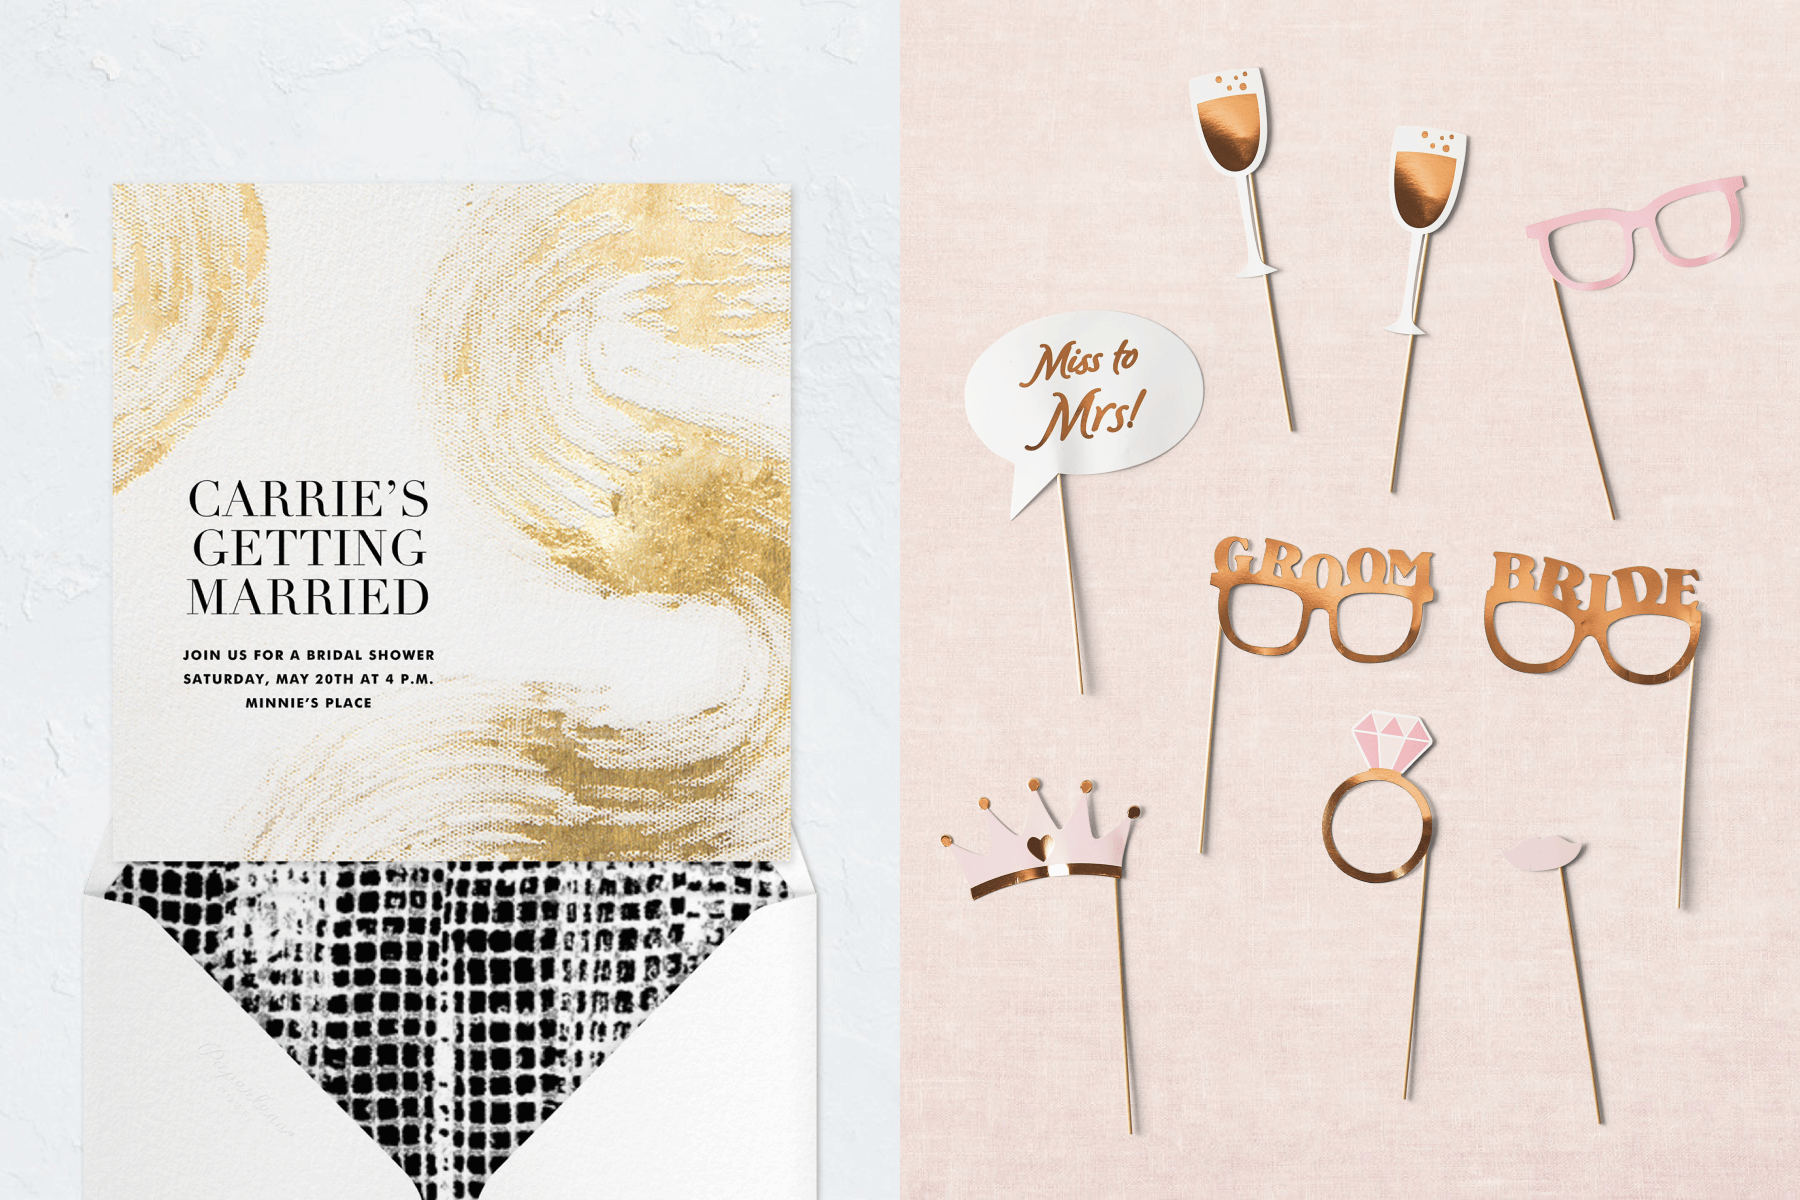 Left: A white bridal shower invitation with gold abstract brushstrokes. Right: Pink and rose gold wedding-themed photo booth props, including eyeglasses, Champagne bottle, diamond ring, and more.